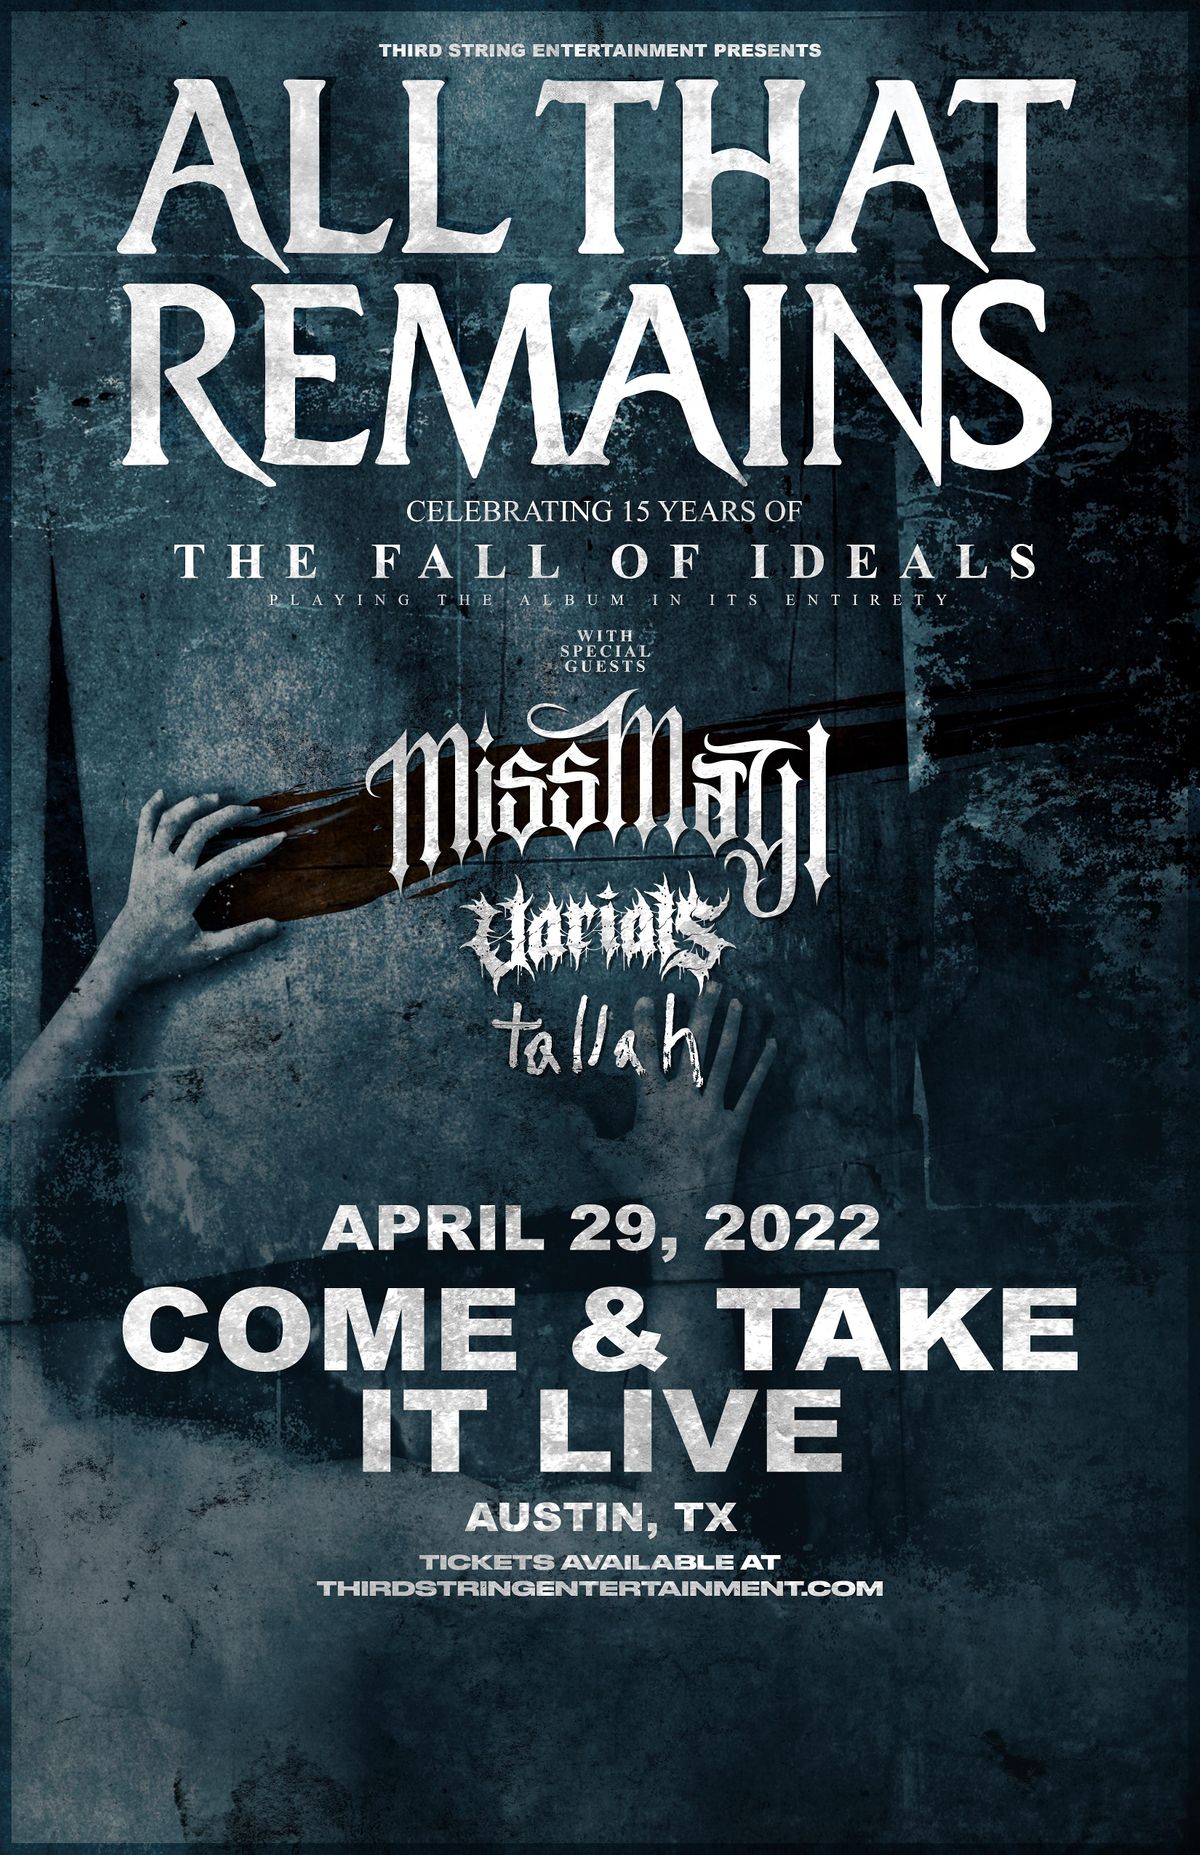 ALL THAT REMAINS: Celebrating 15 Years of 'The Fall of Ideals'